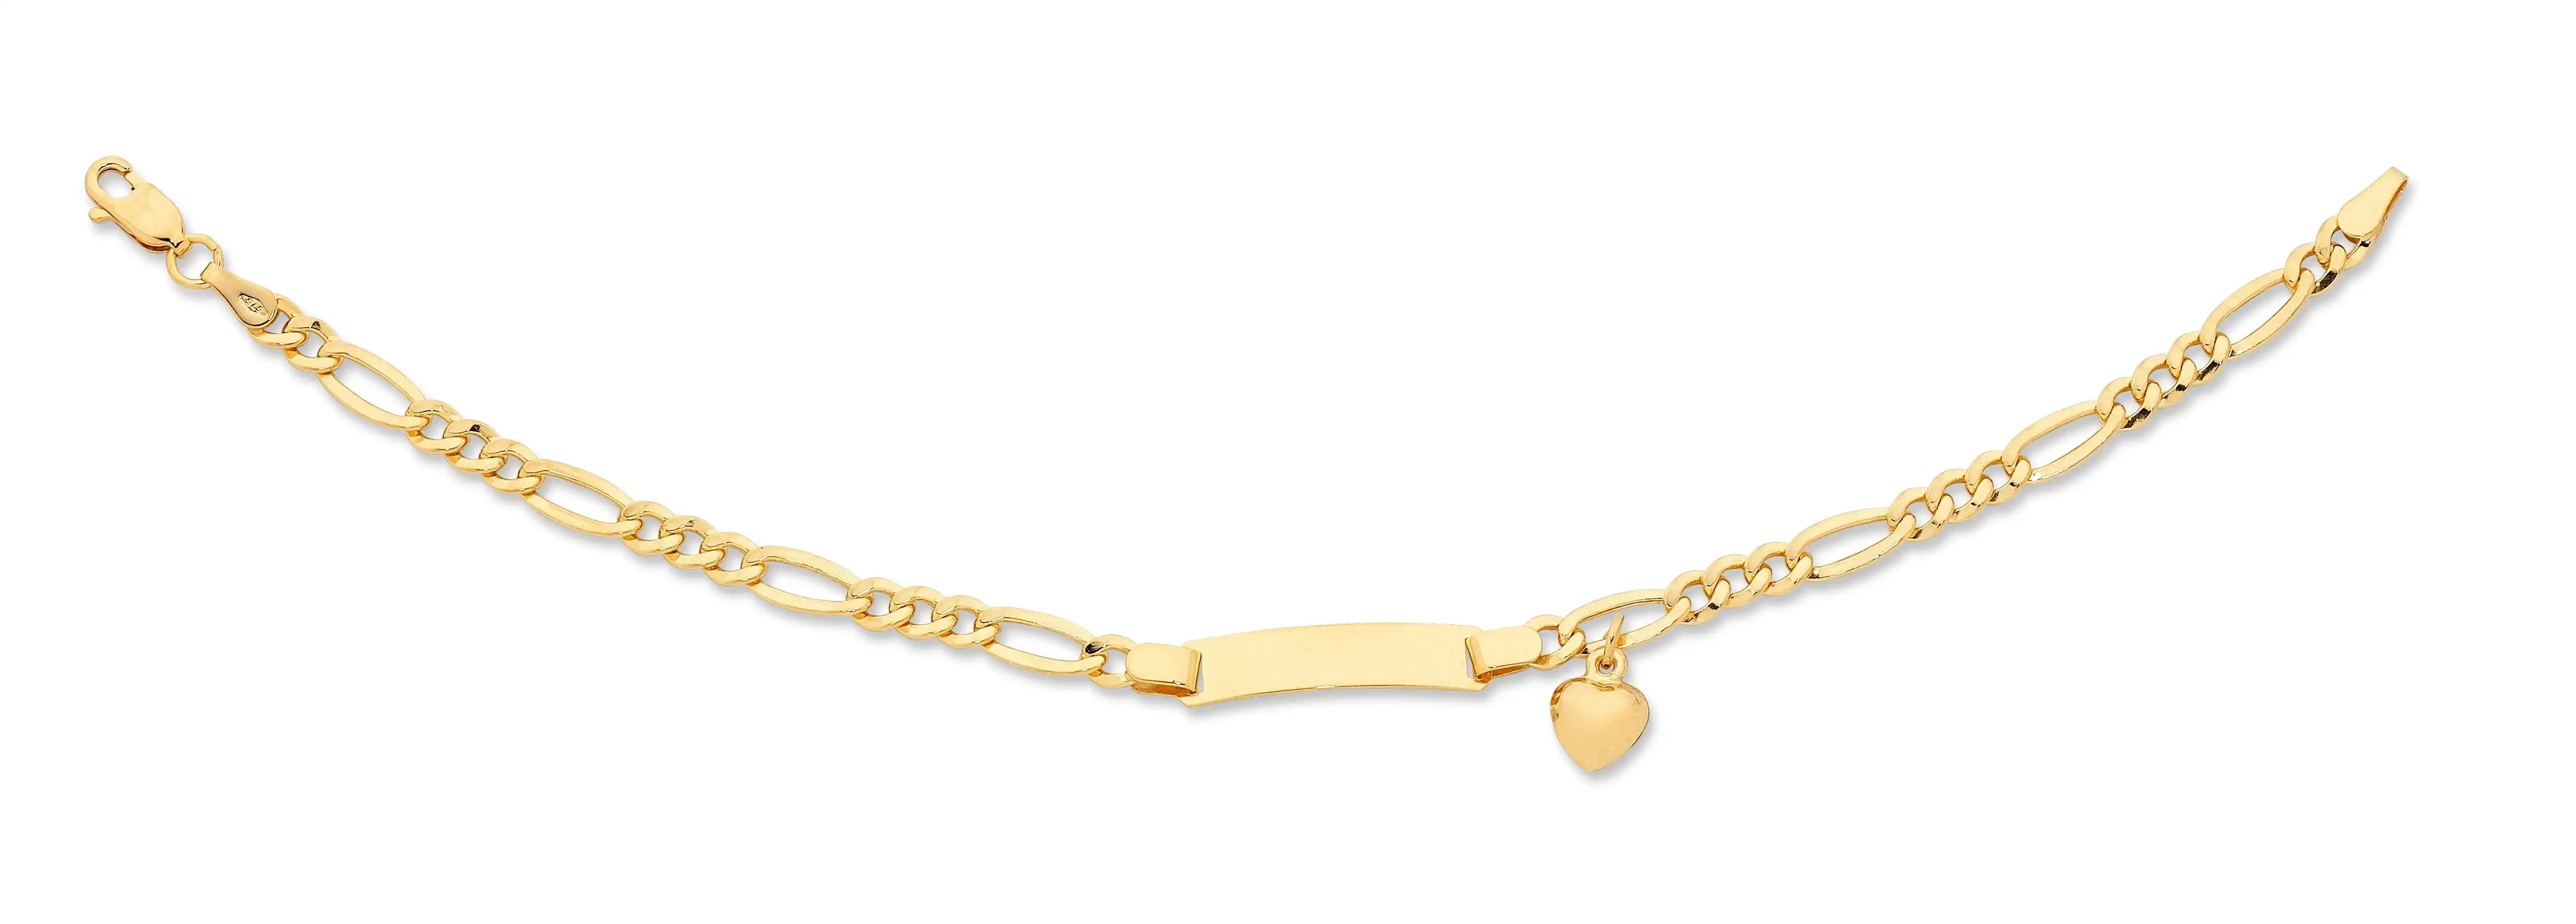 9ct Yellow Gold Silver Infused ID Charm Bracelet